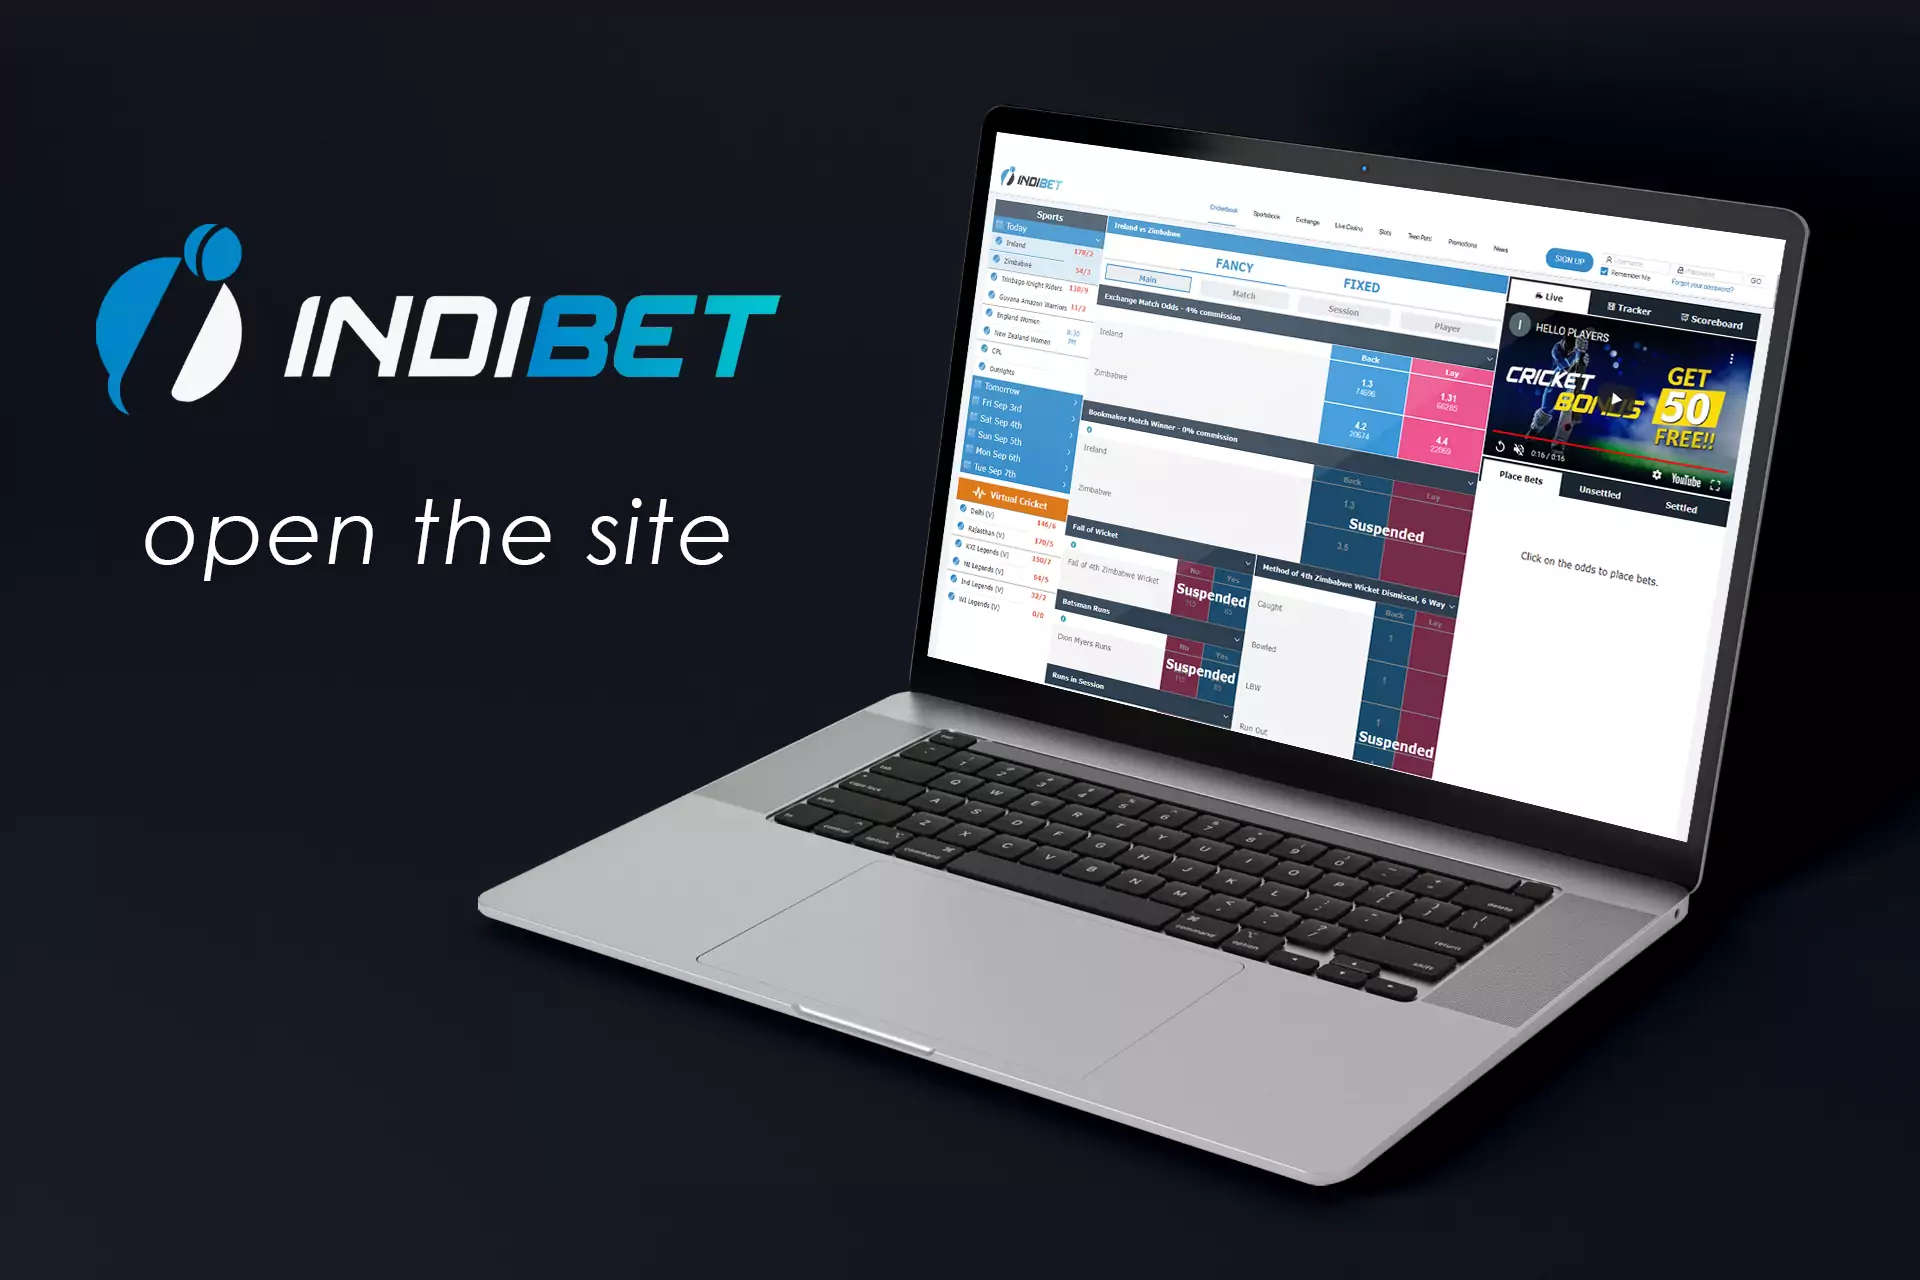 Go to the site of Indibet using our link.